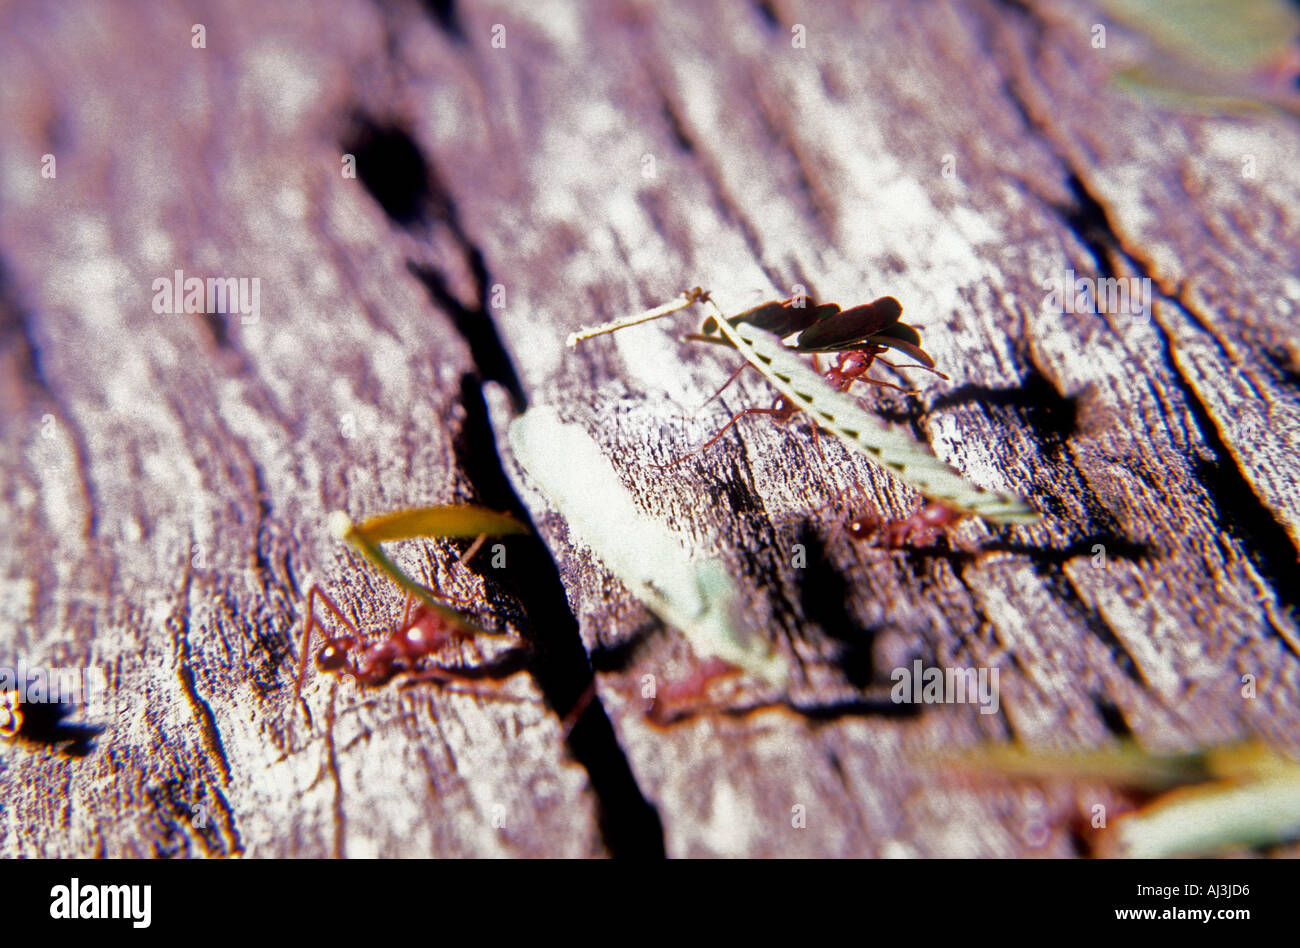 Acromyrmex Ants carrying creosote leaves along a timber in central Argentina Stock Photo